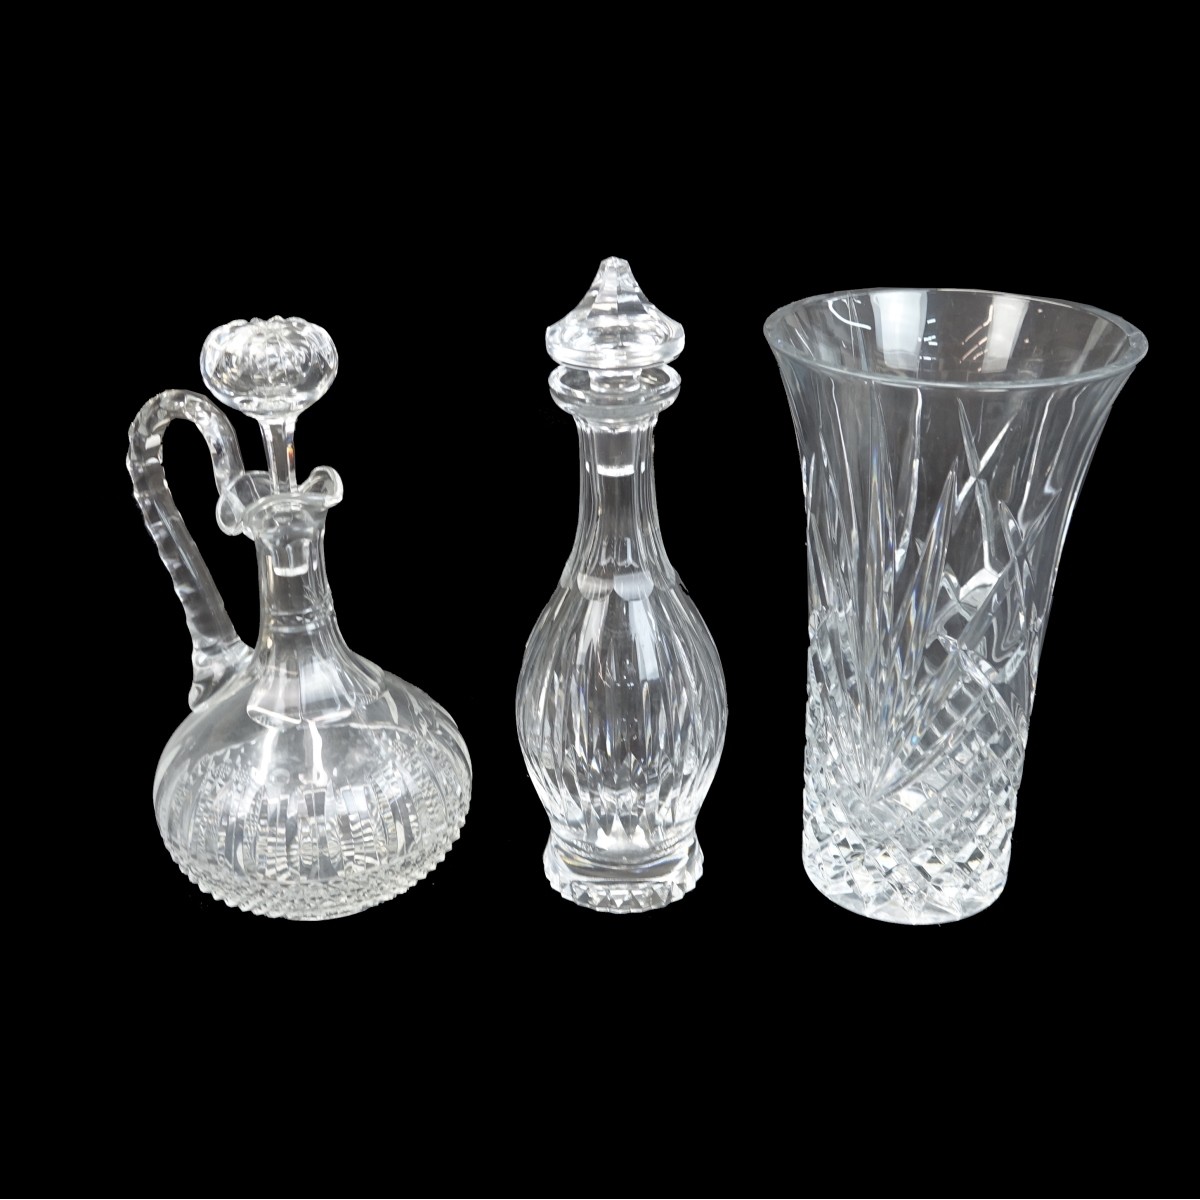 3 pcs Crystal Waterford style Barware